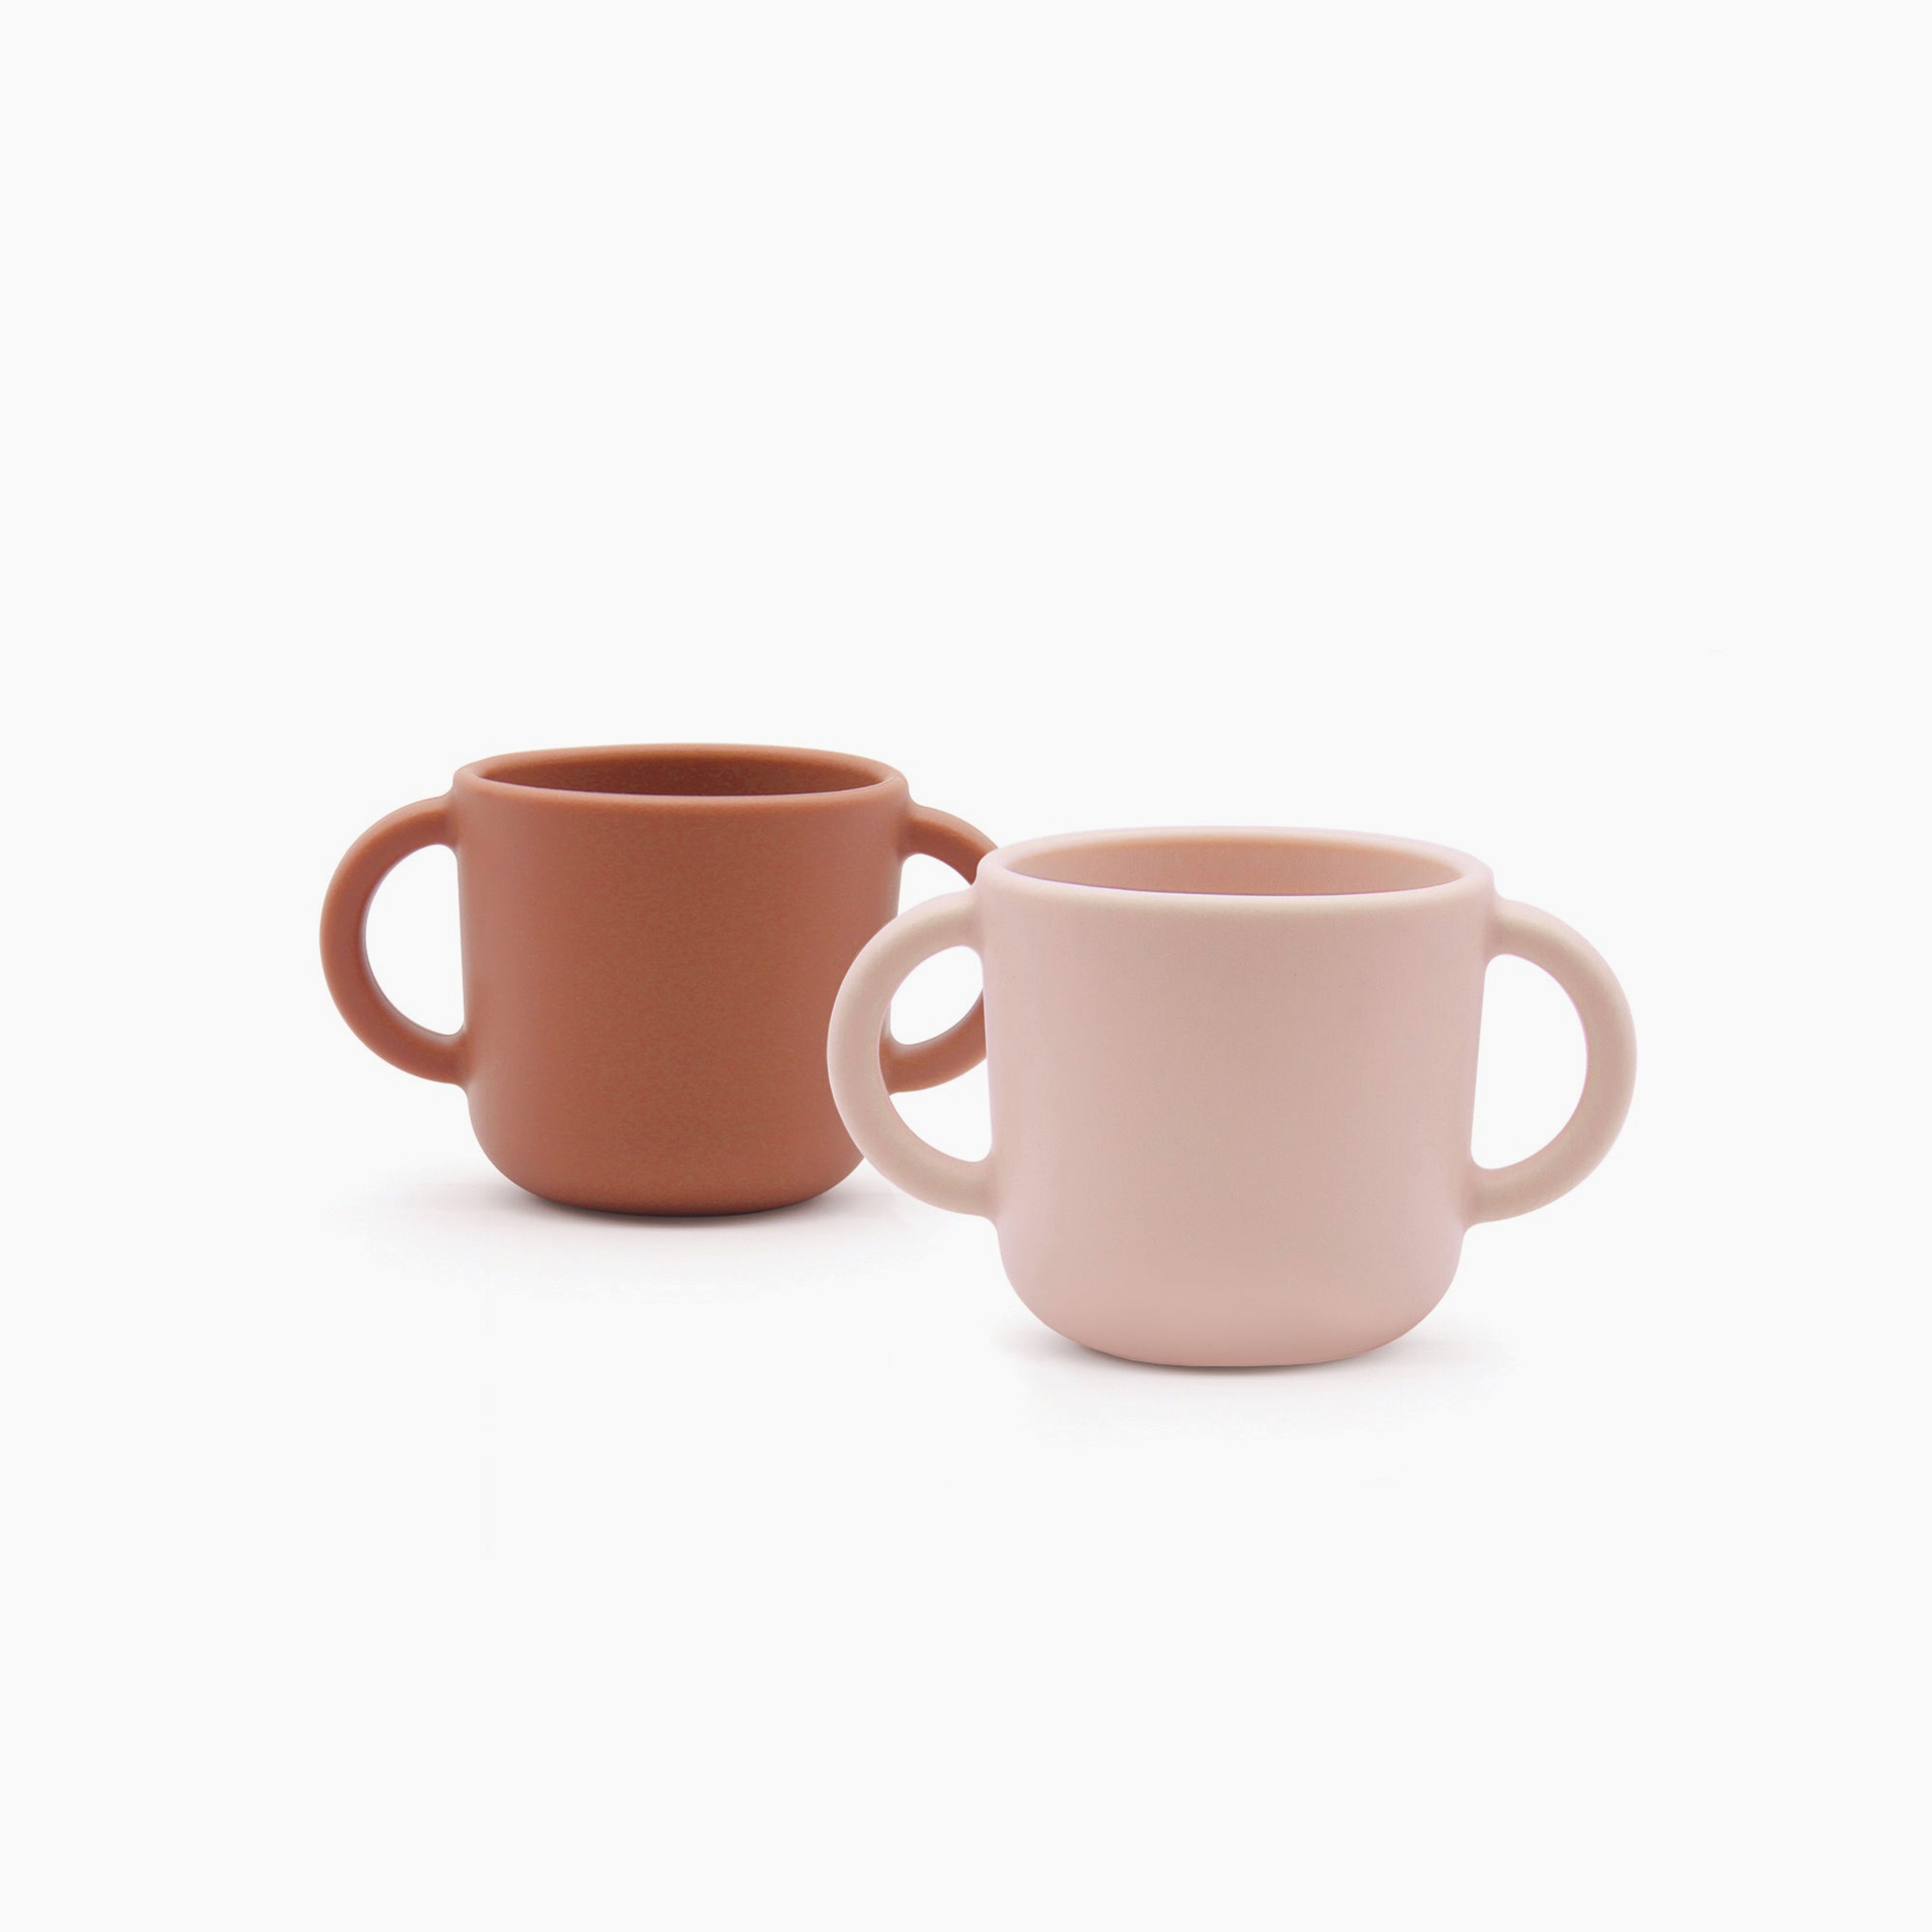 Silicone Training Cup Set - Blush / Terracotta